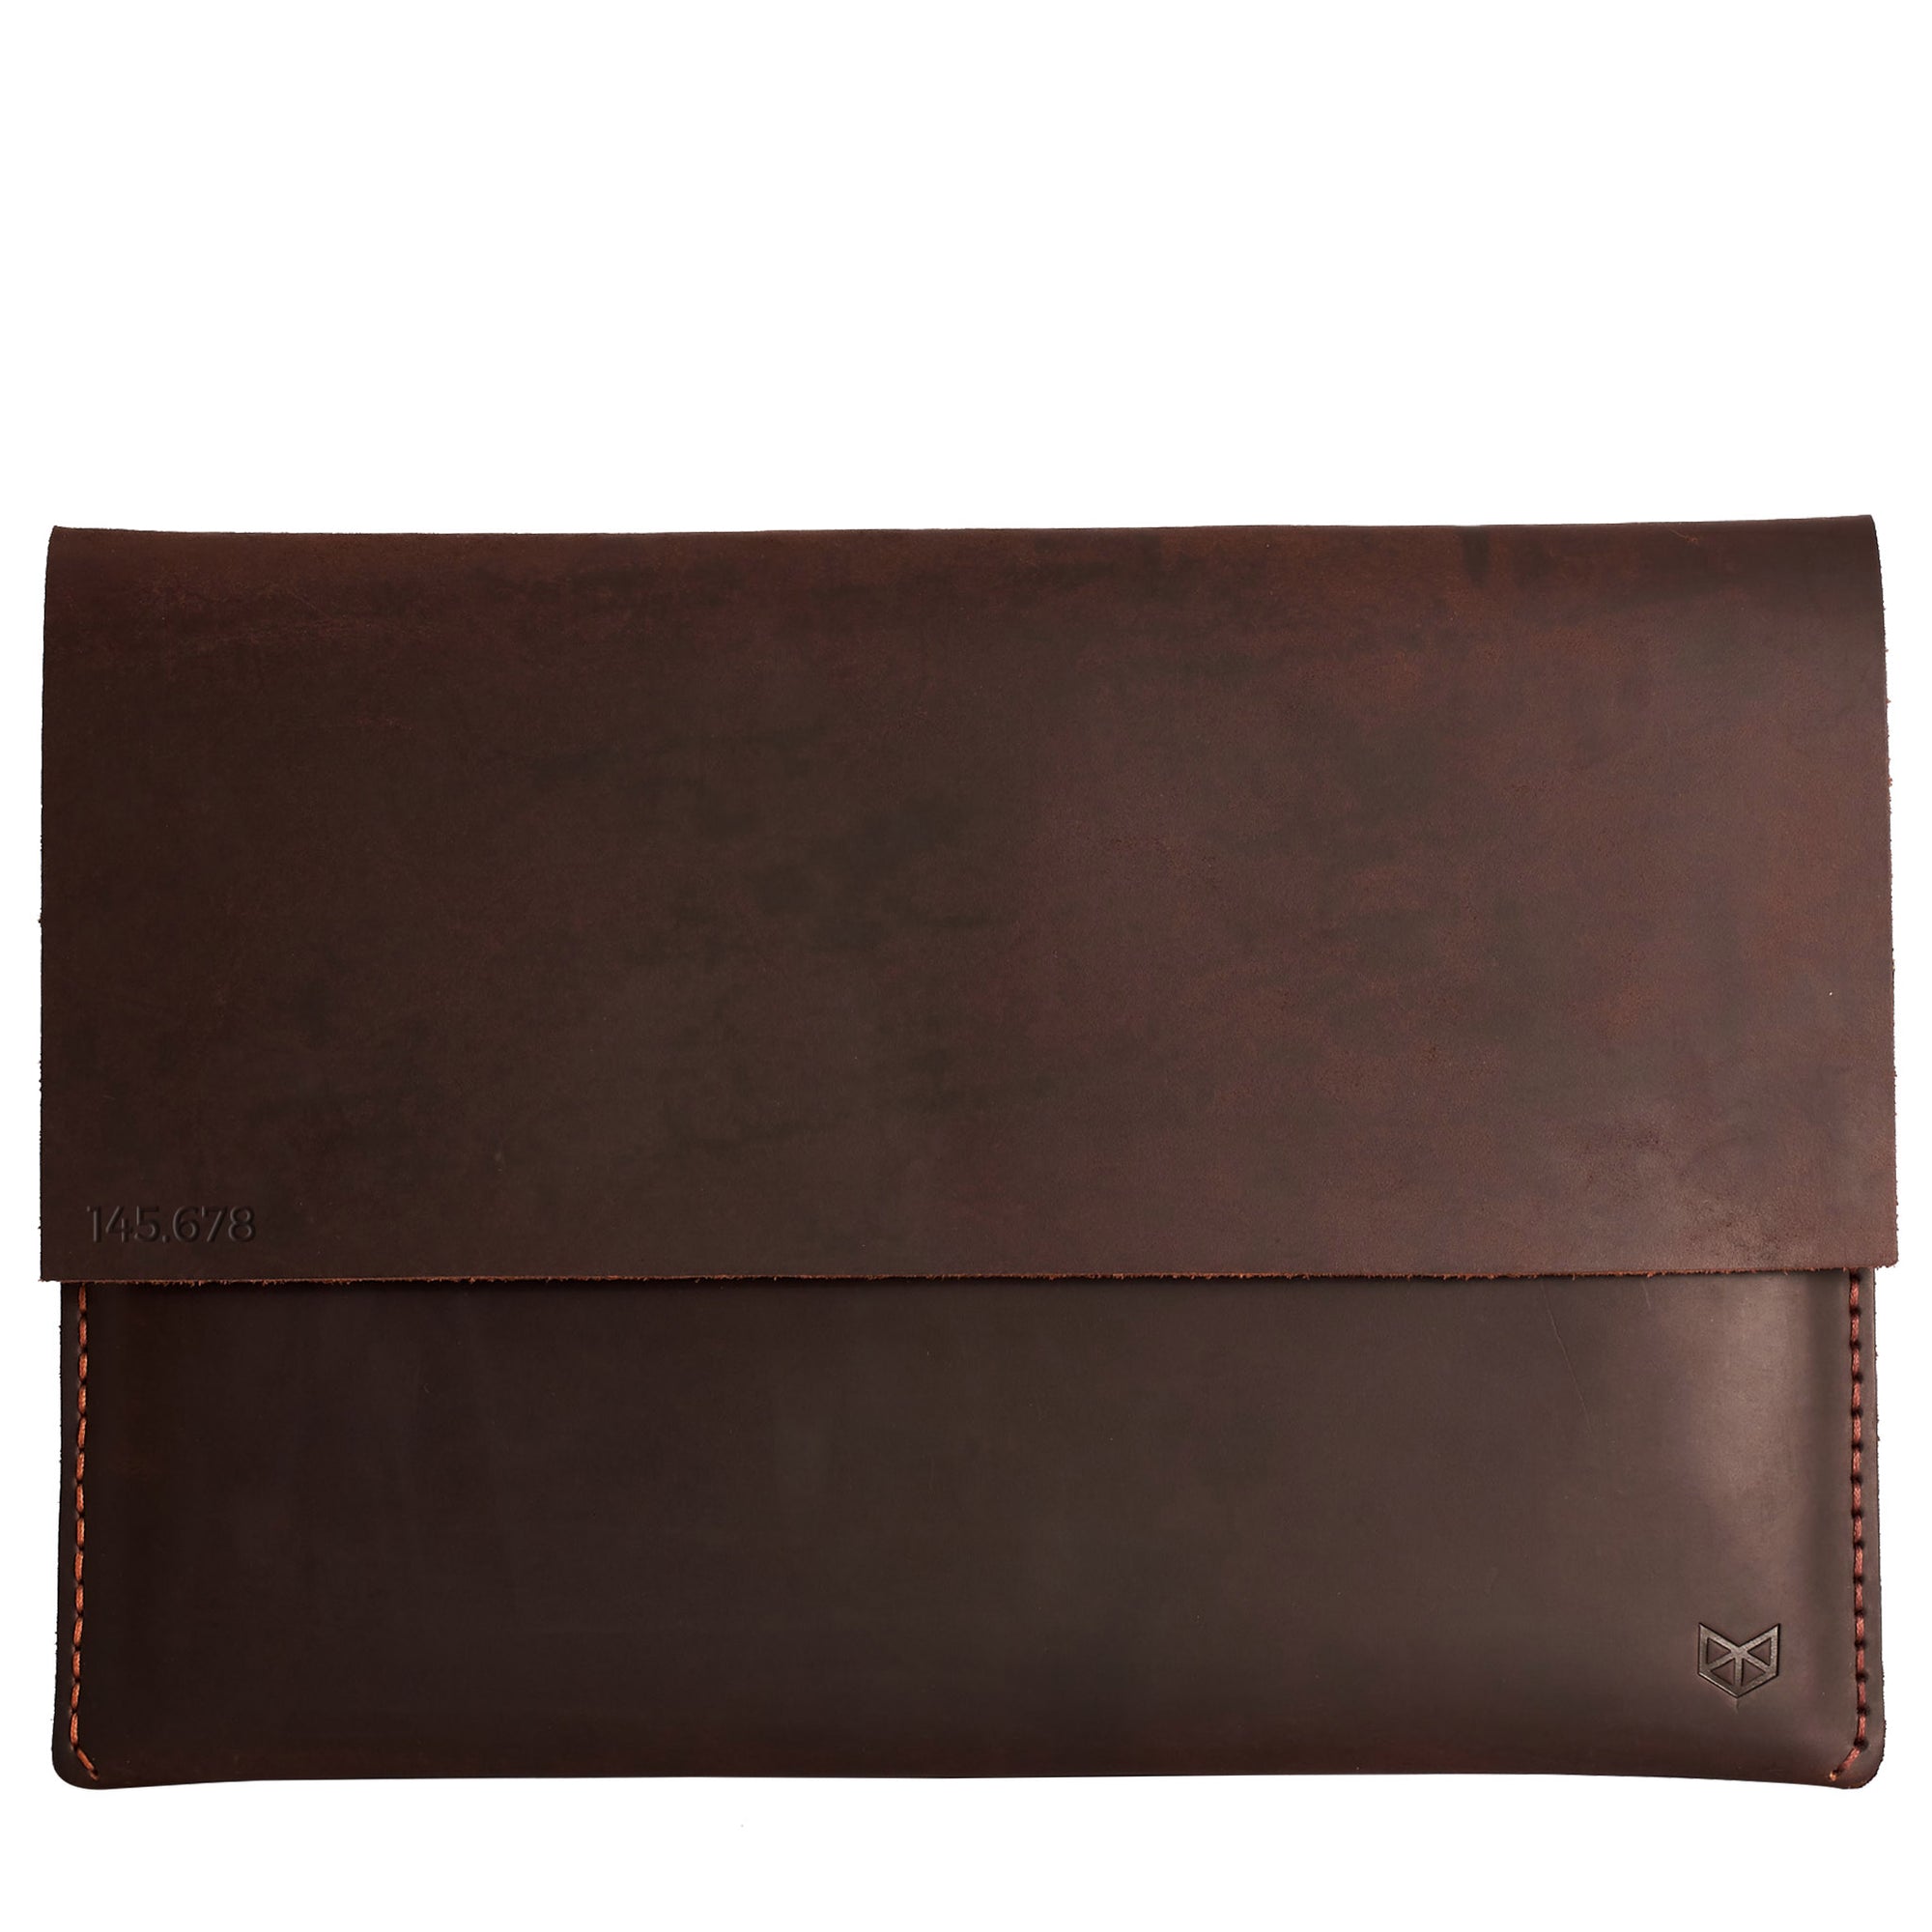 name engraving on leather Microsoft Surface sleeve